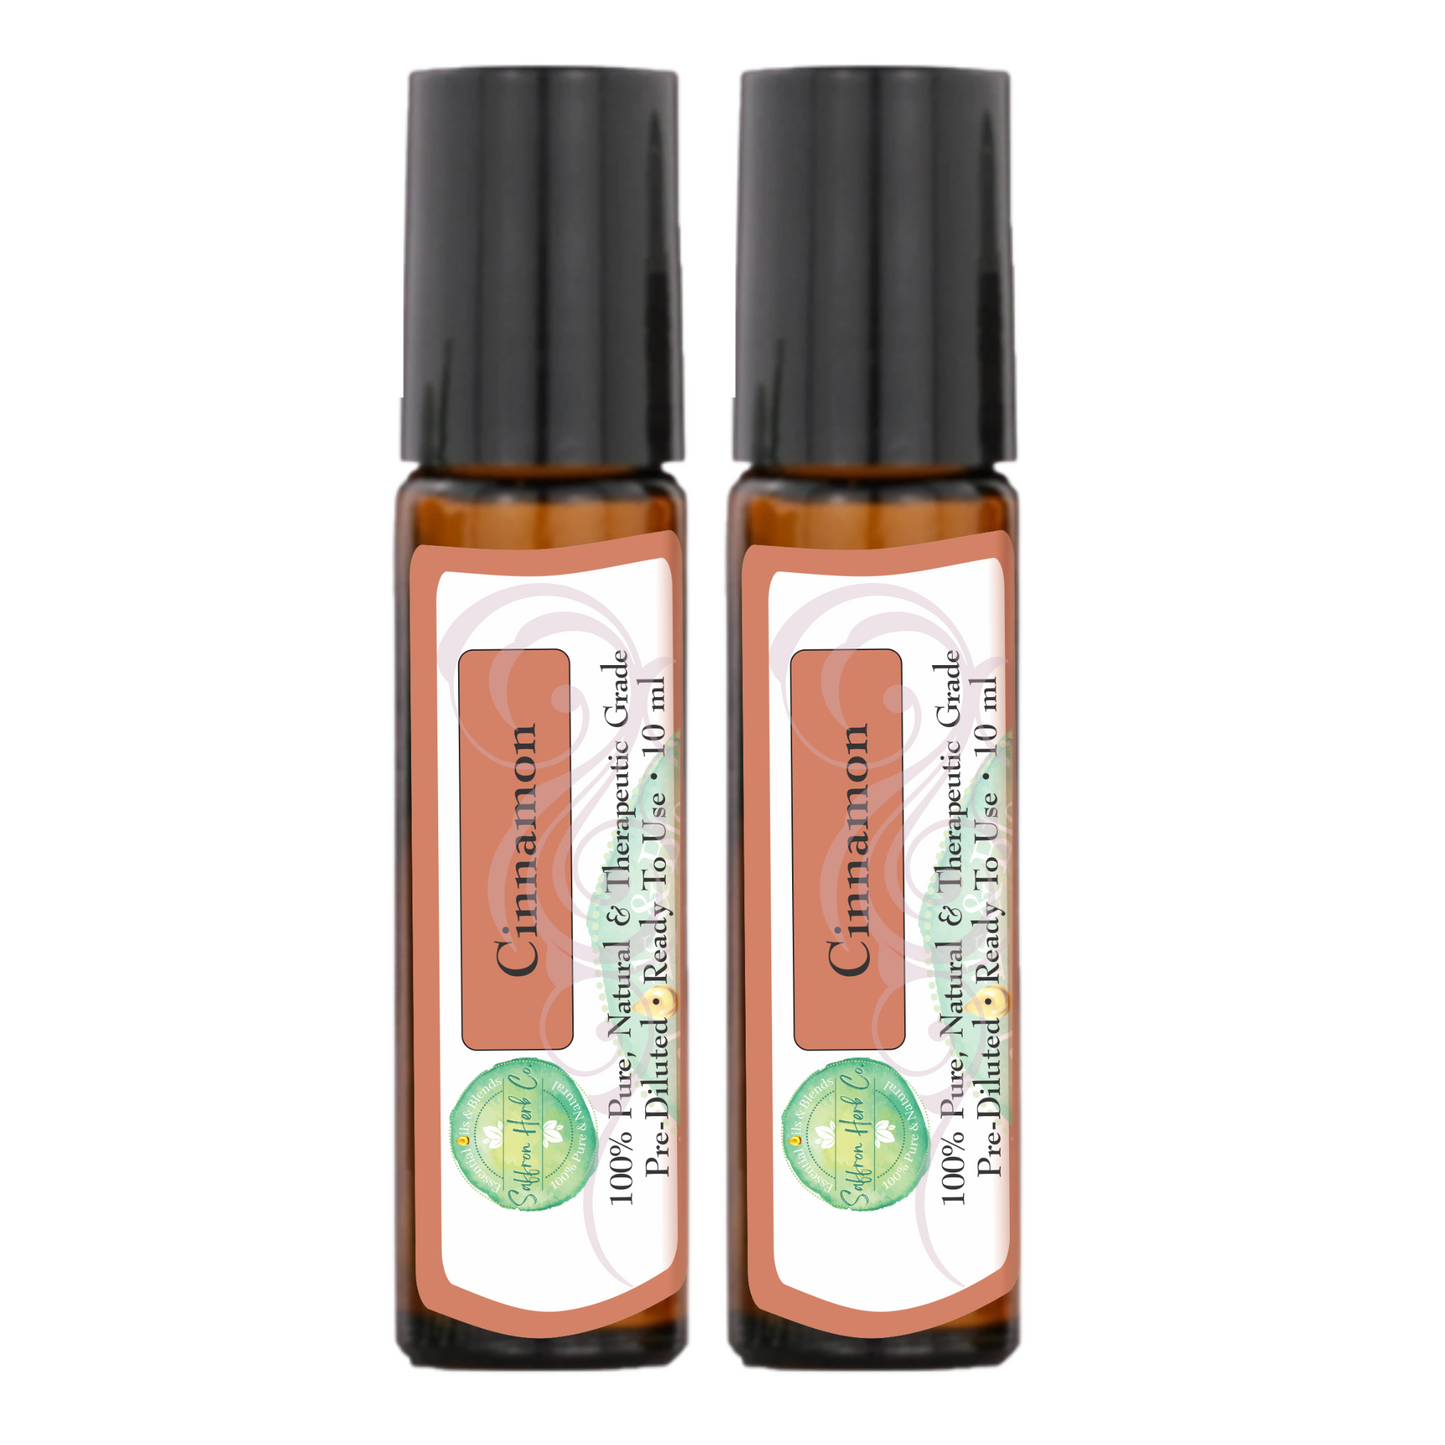 Cinnamon Essential Oil Roller Bottle Blend • 100% Pure & Natural • Pre-Diluted • Ready To Use